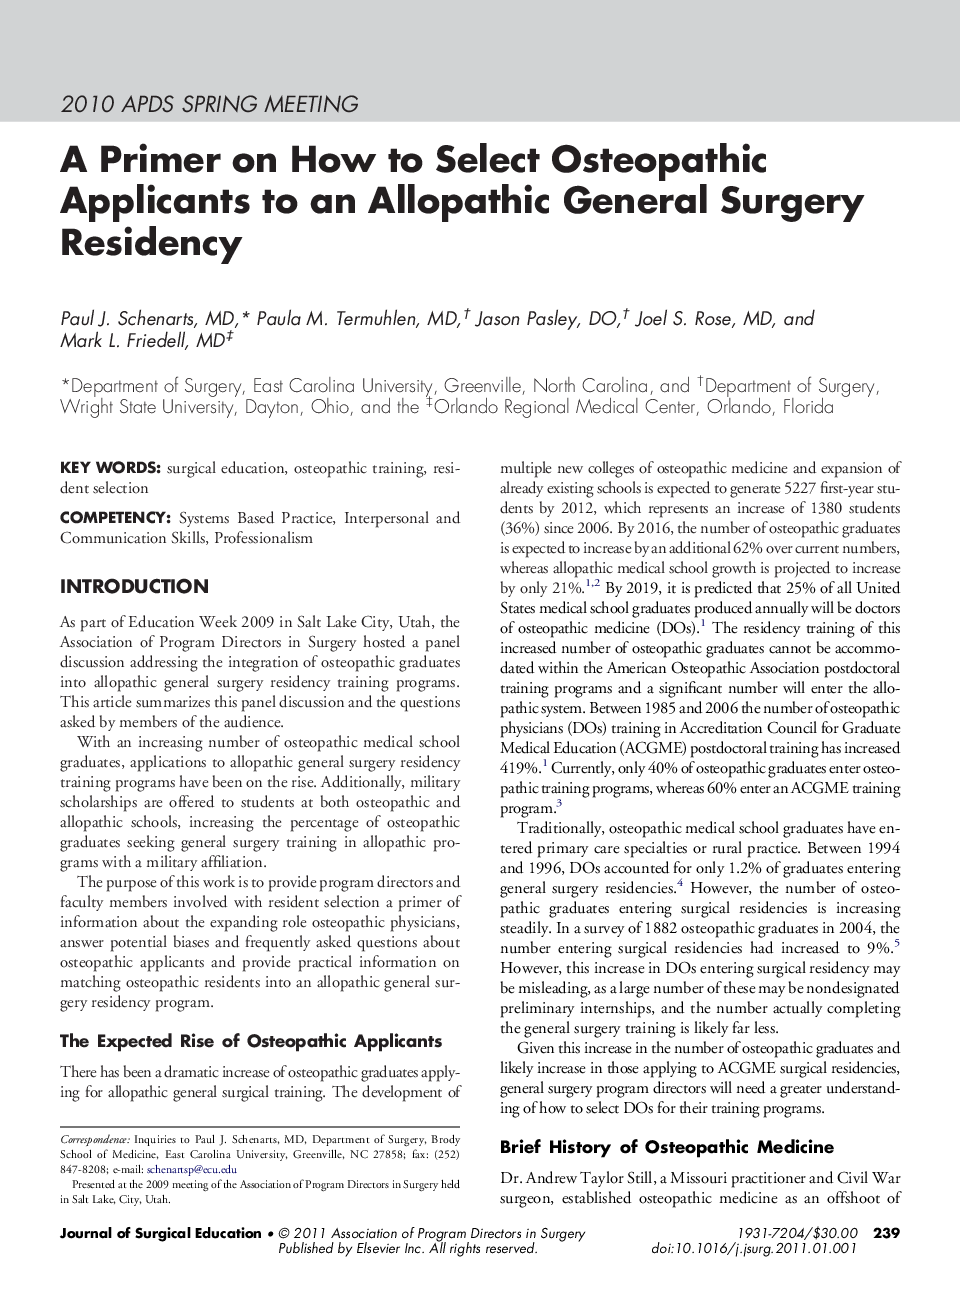 A Primer on How to Select Osteopathic Applicants to an Allopathic General Surgery Residency